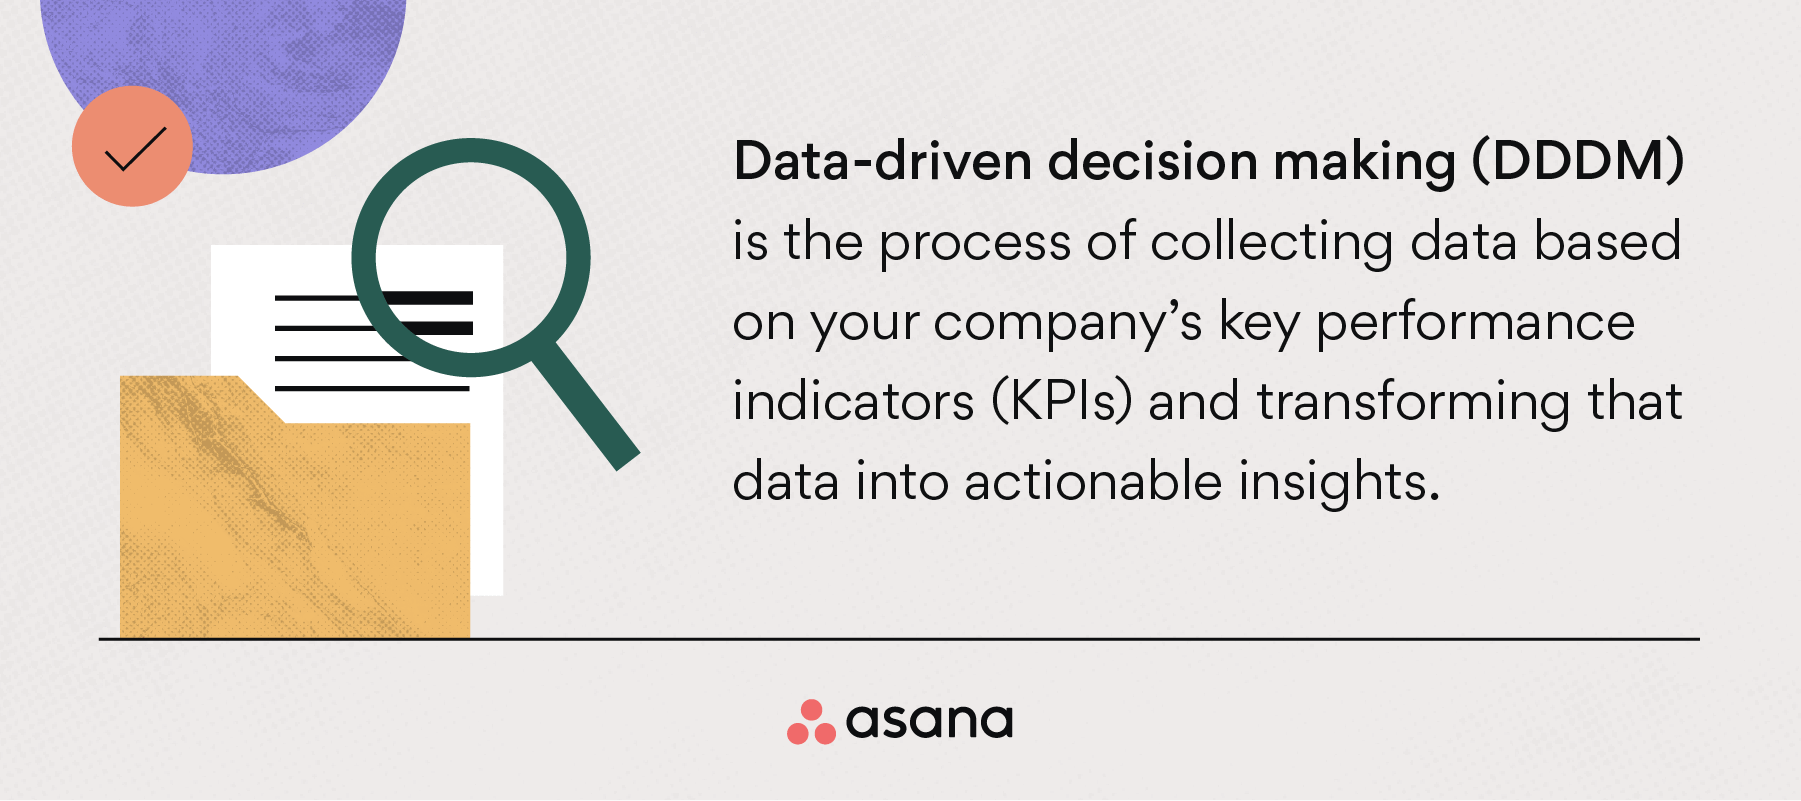 What is data-driven decision making (DDDM)?